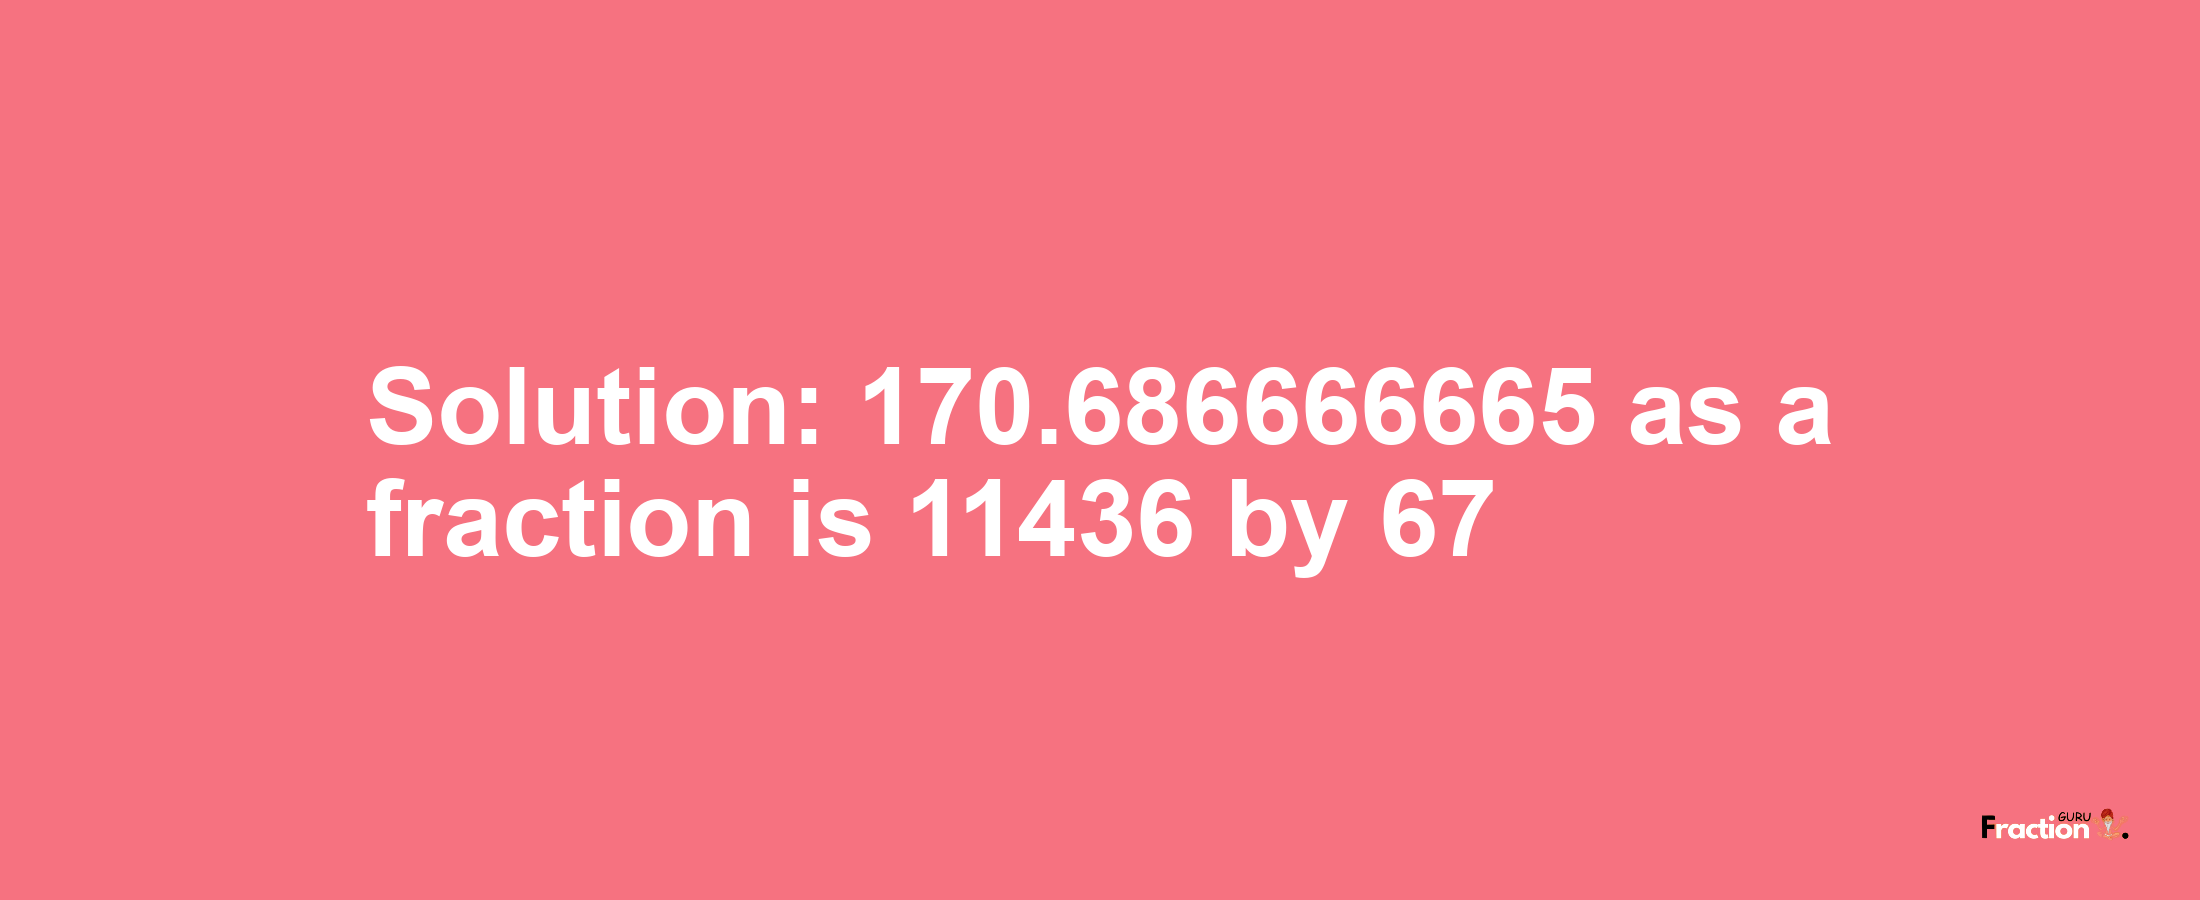 Solution:170.686666665 as a fraction is 11436/67